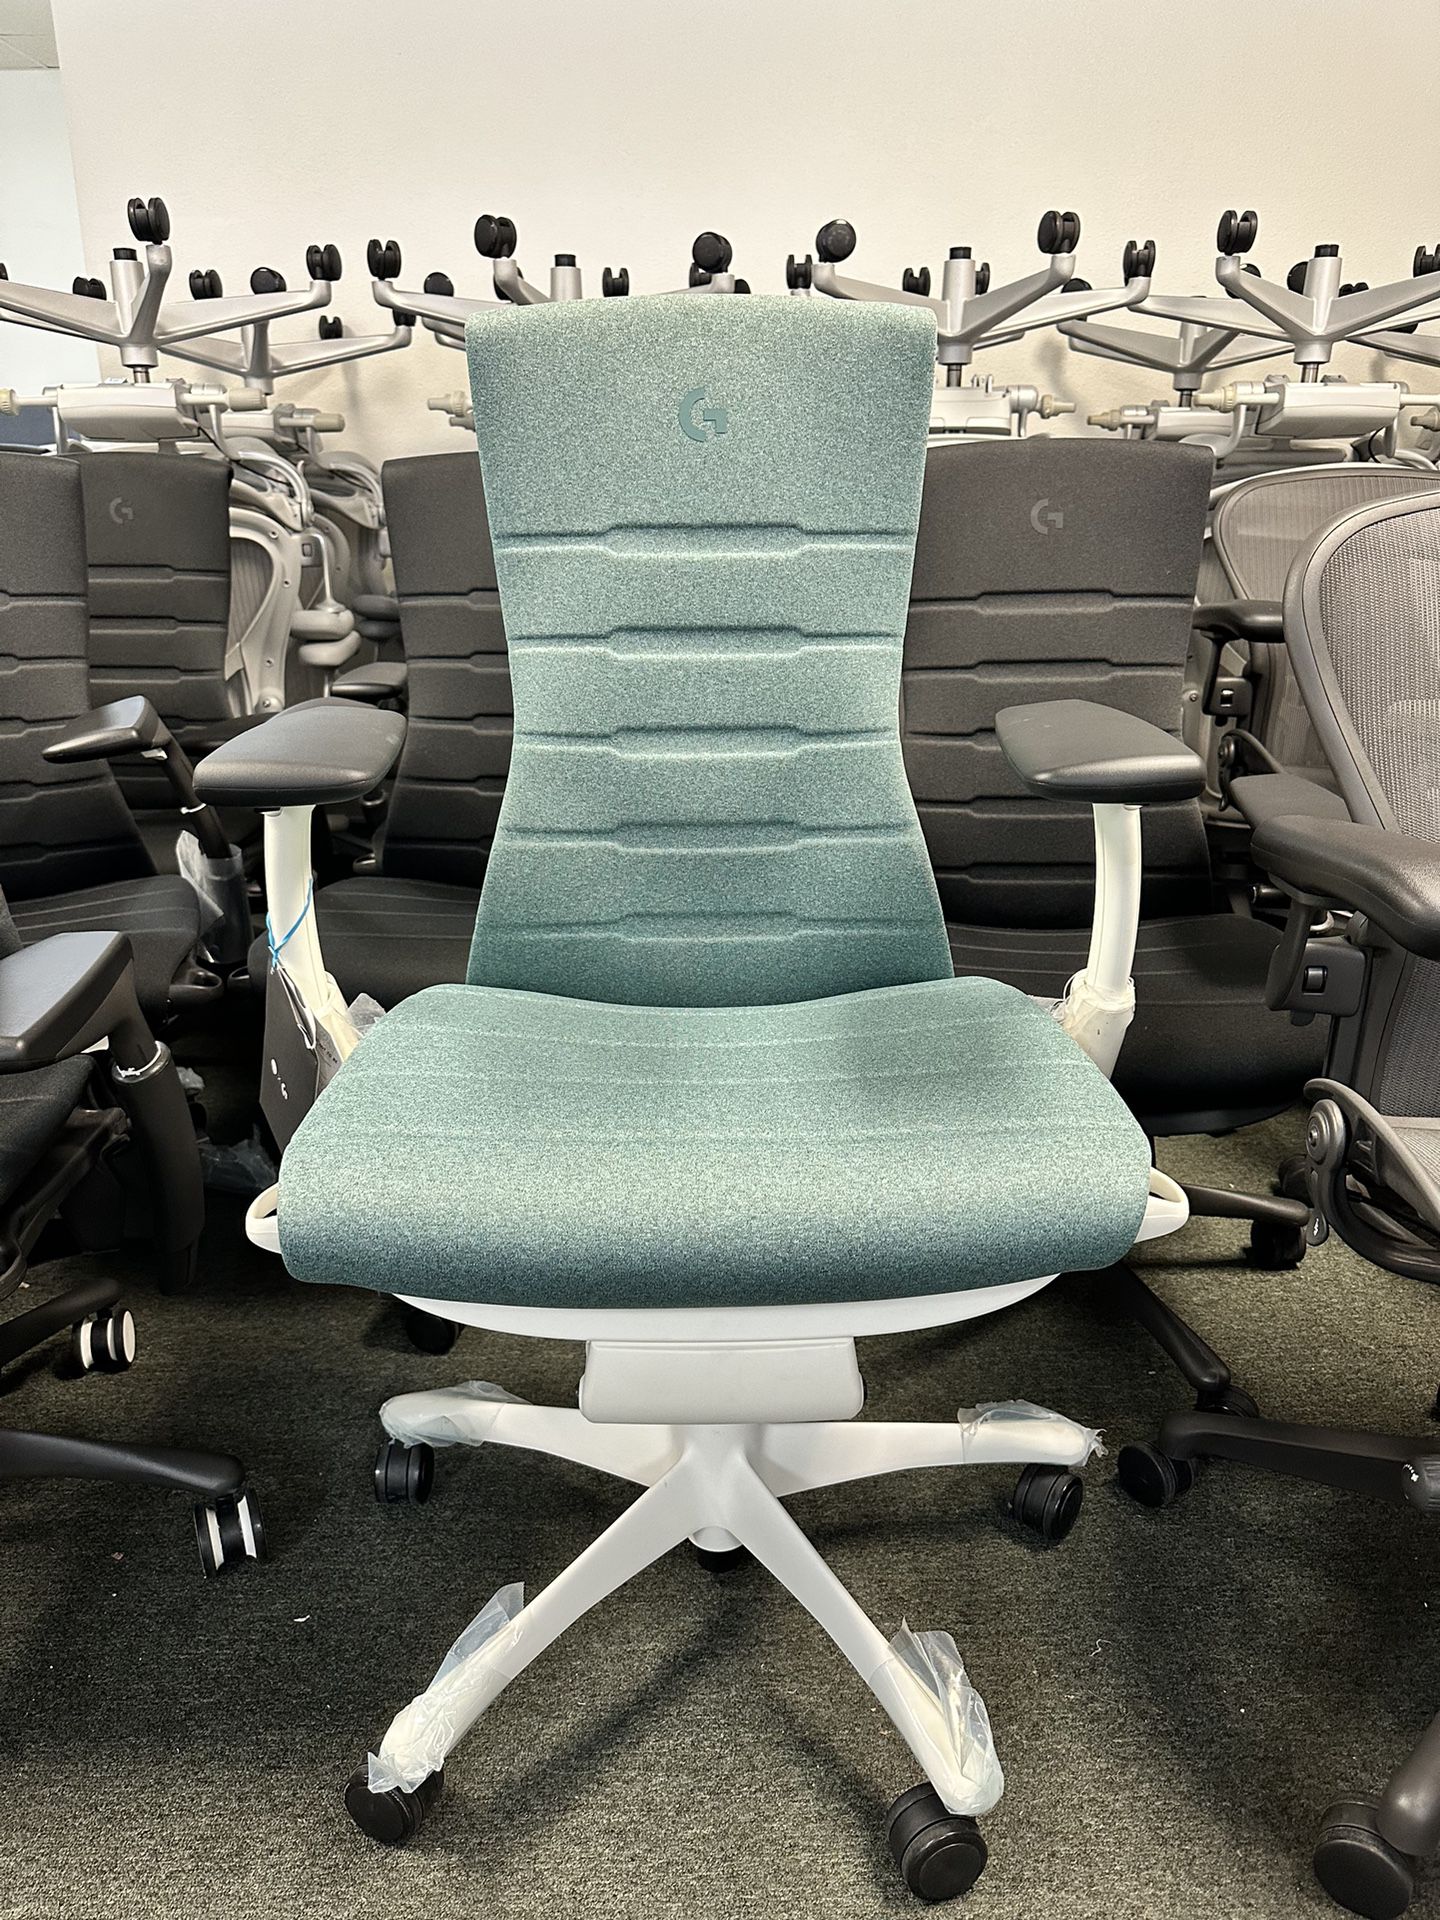 💥GUARANTEE LOWEST PRICE 💥 BRAND NEW HERMAN MILLER LOGITECH EMBODY GAMING CHAIRS 🔥pick up at the store- deliver- ship